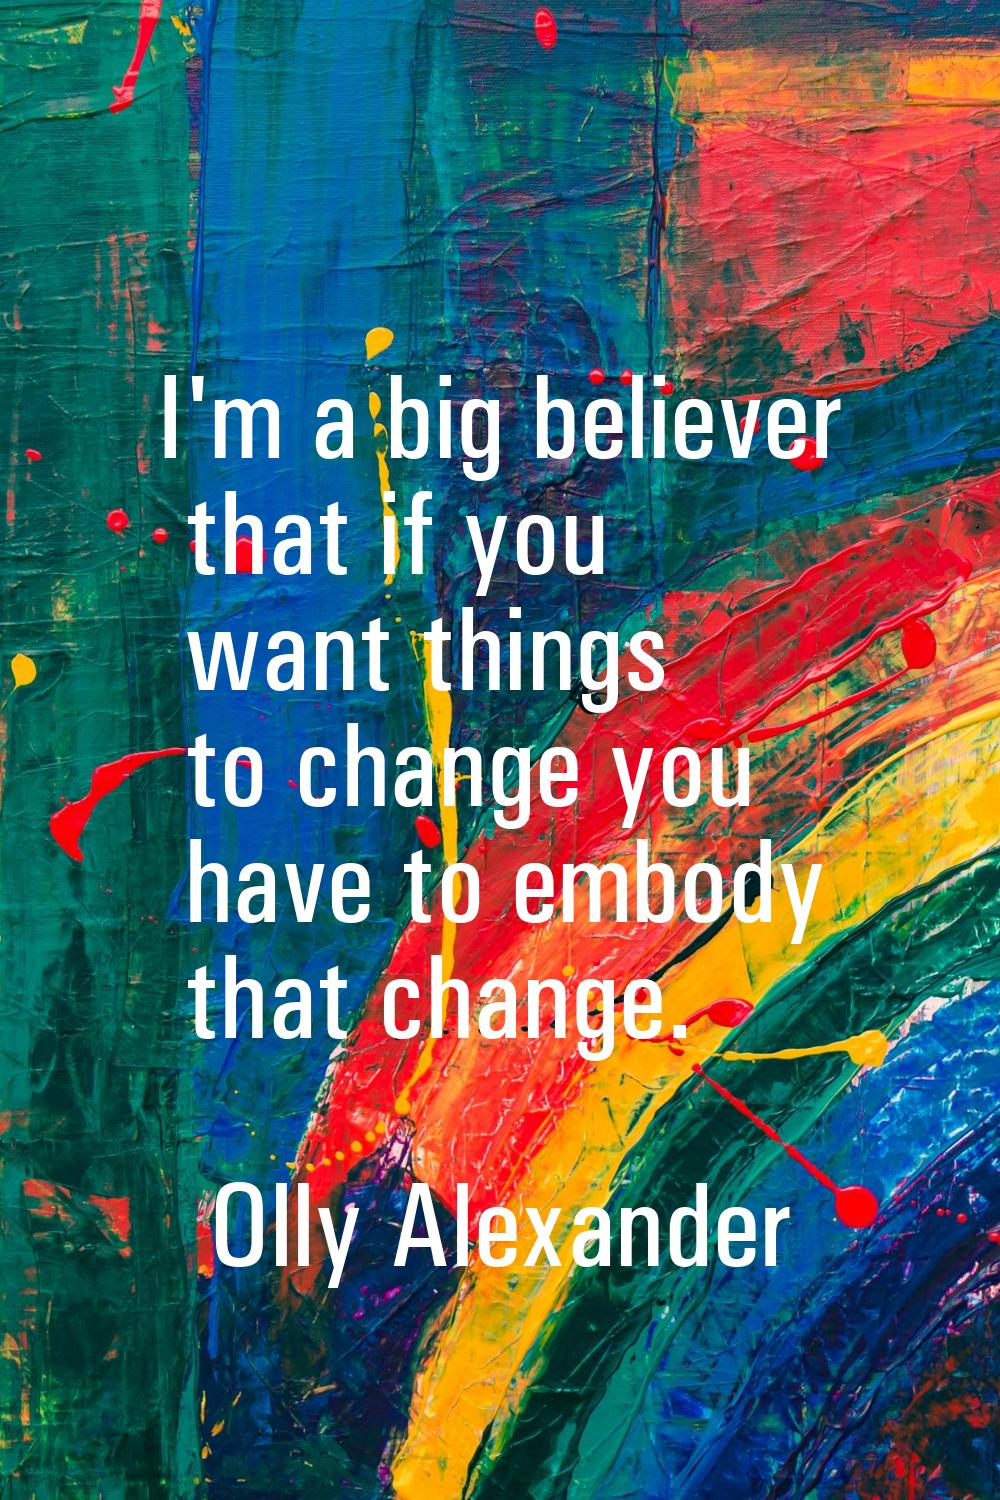 I'm a big believer that if you want things to change you have to embody that change.